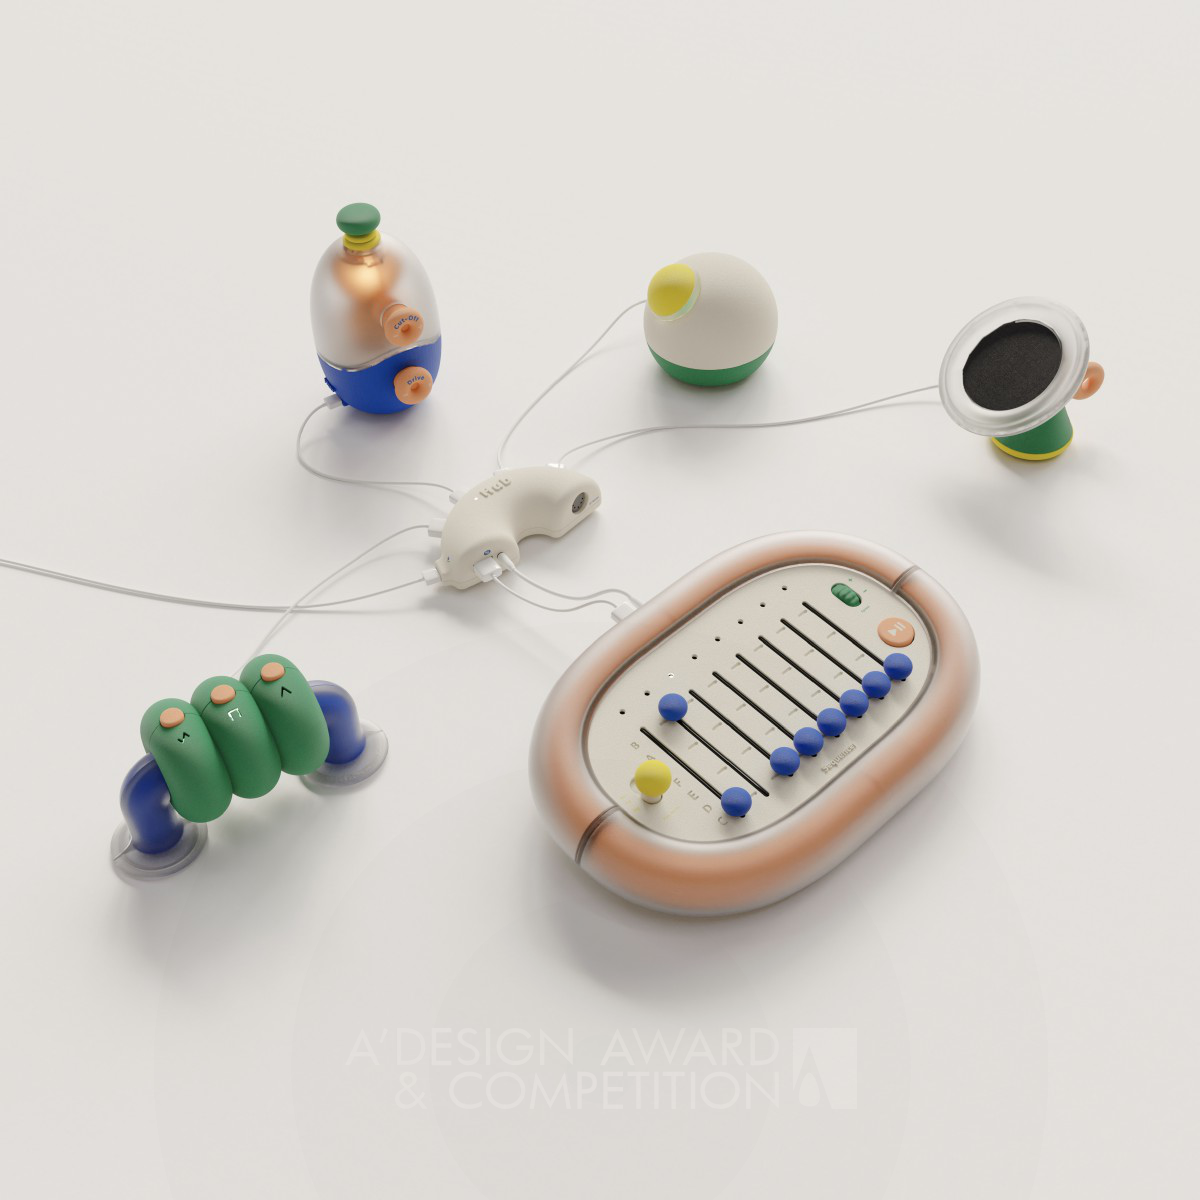 HSIN CHEN LIN Unveils Dudo, an Innovative Music Toy for Children